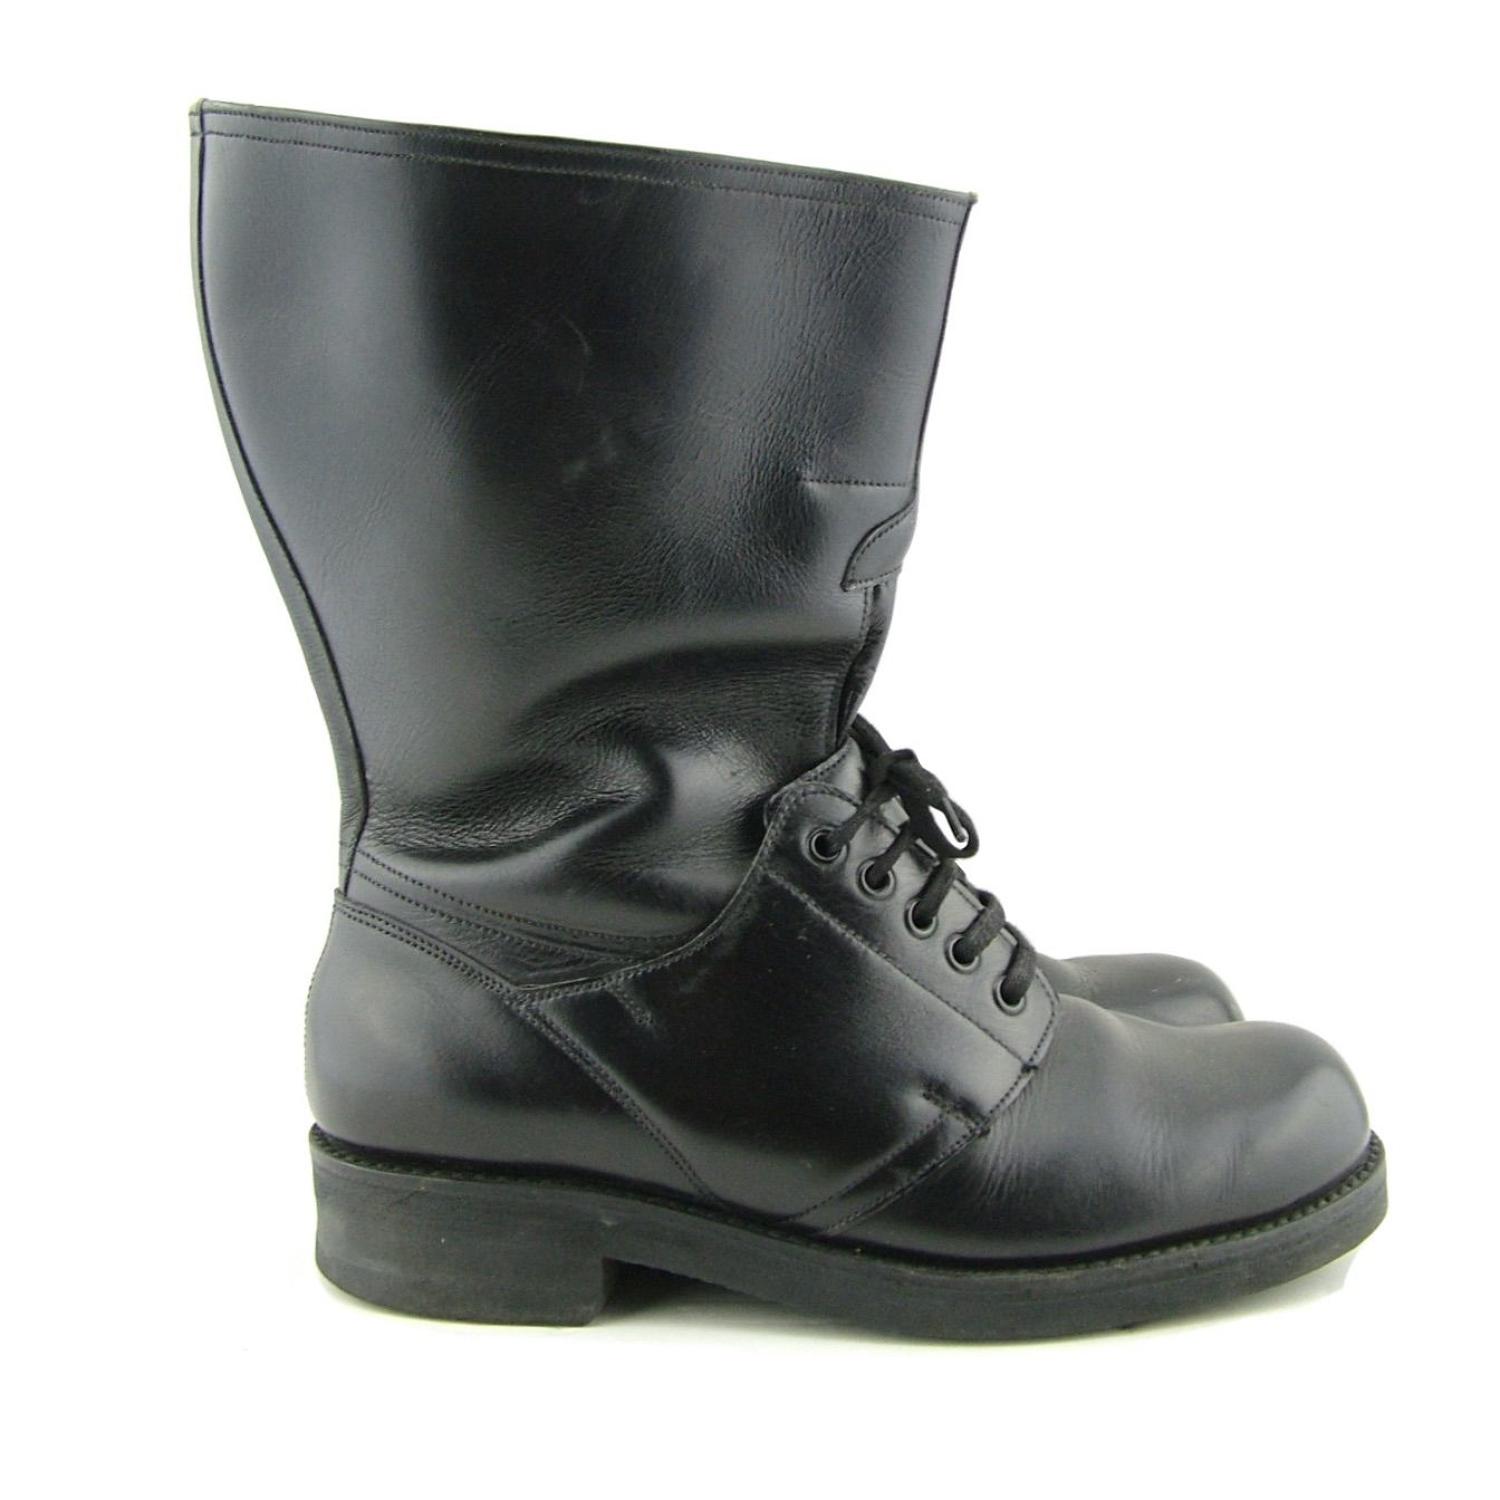 RAF 1952 pattern flying boots